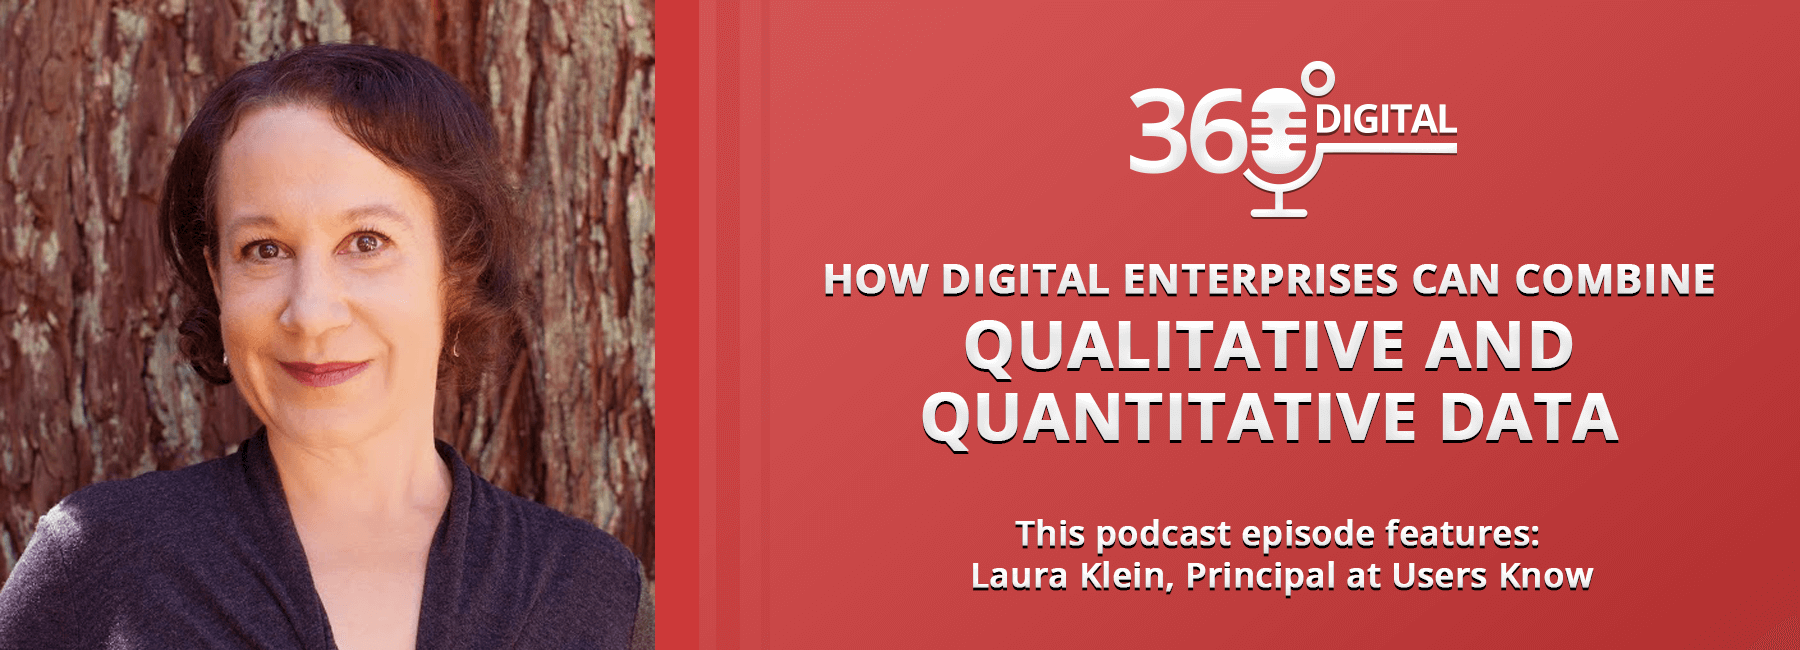 New episode with Laura Klein on 360 Digital